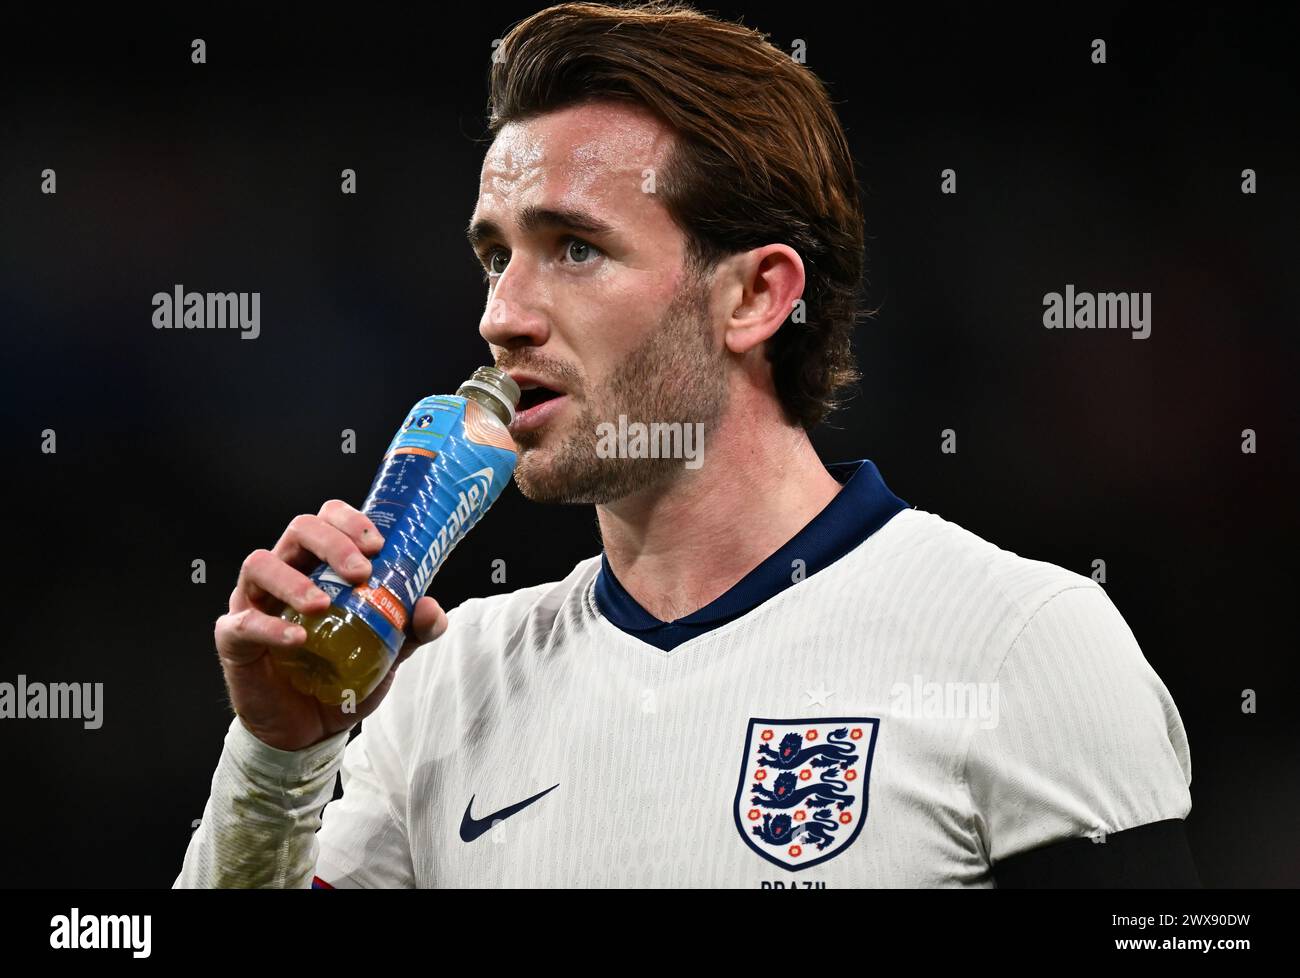 LONDON, ENGLAND - MARCH 23: Ben Chilwell of England drinks Lucozade isotonic during the international friendly match between England and Brazil at Wem Stock Photo